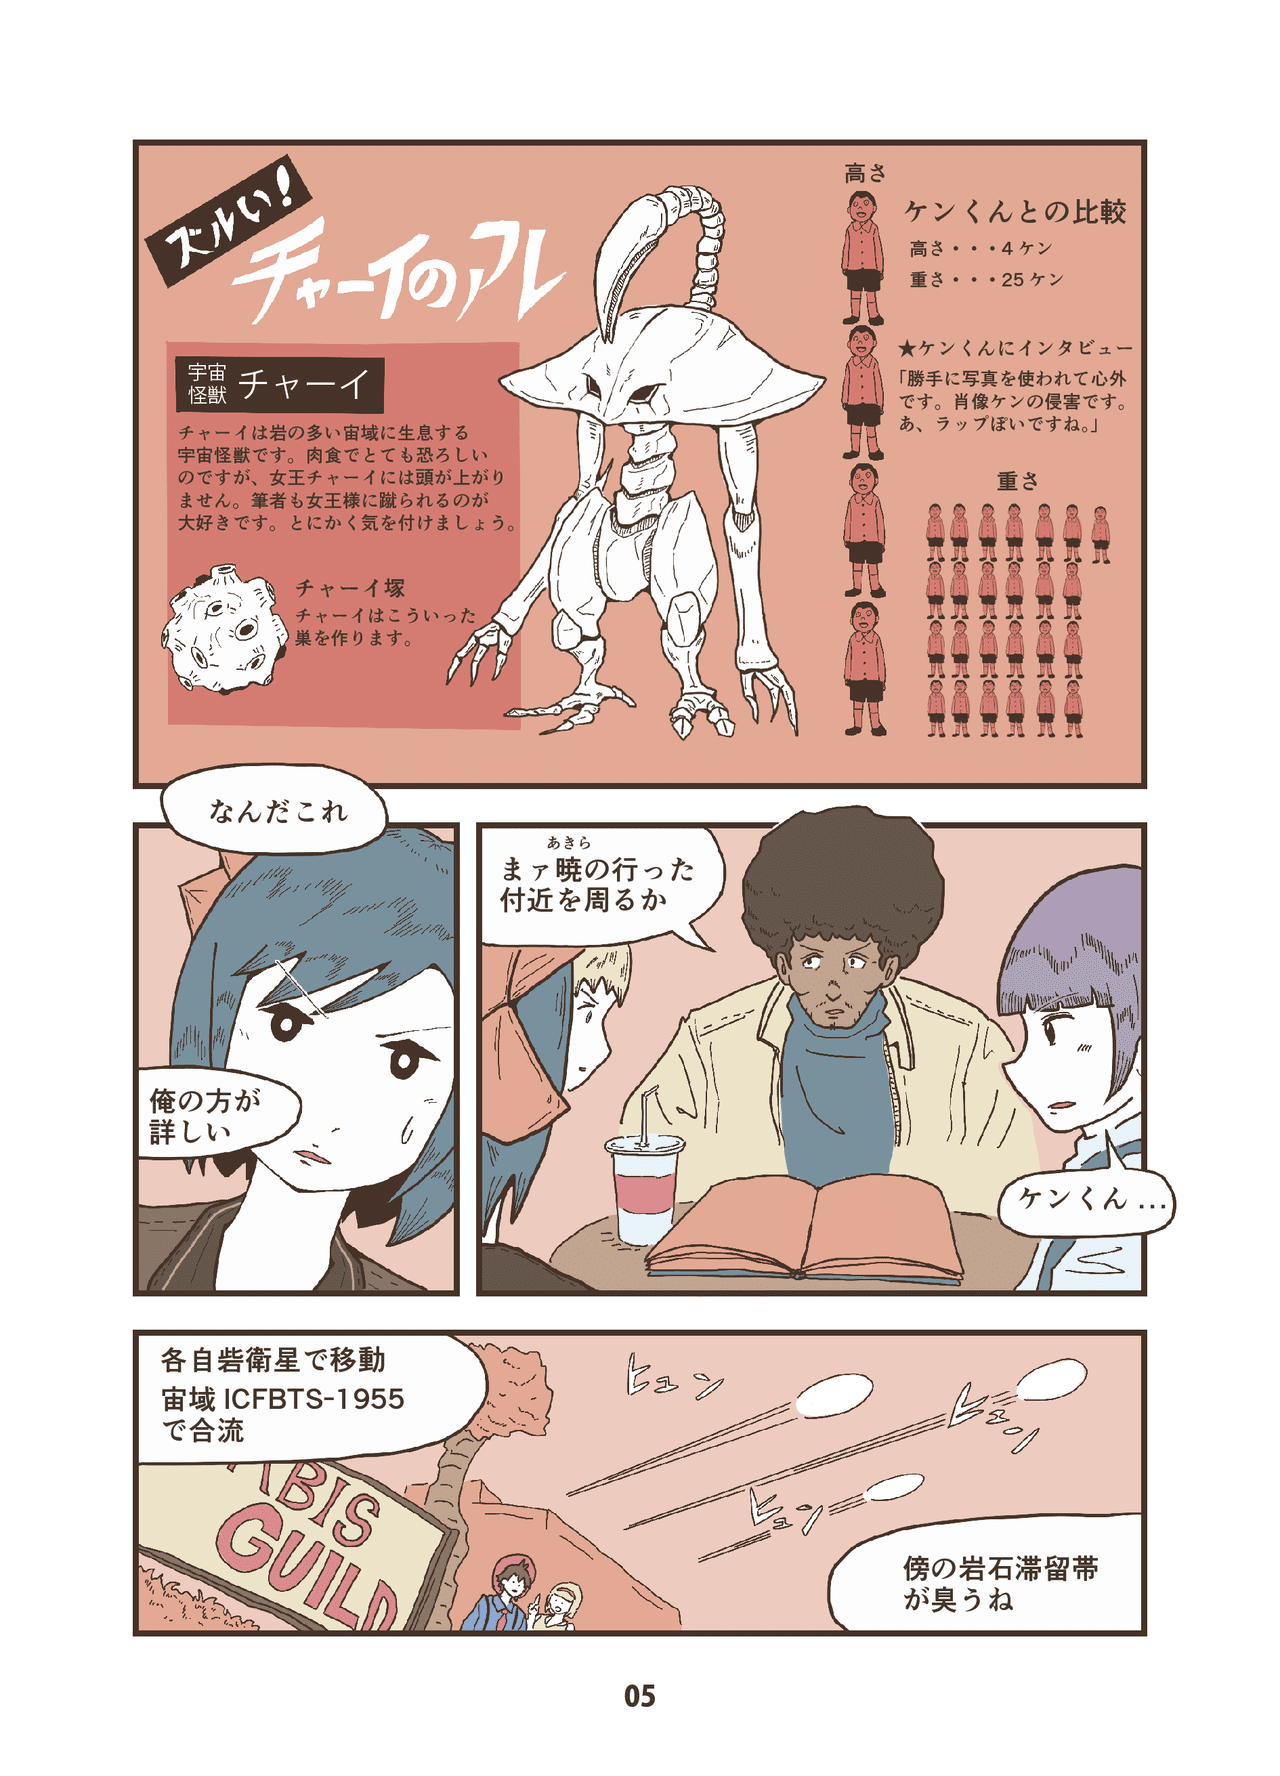 Berry_the_astro_witch_ep02_note_アートボード5